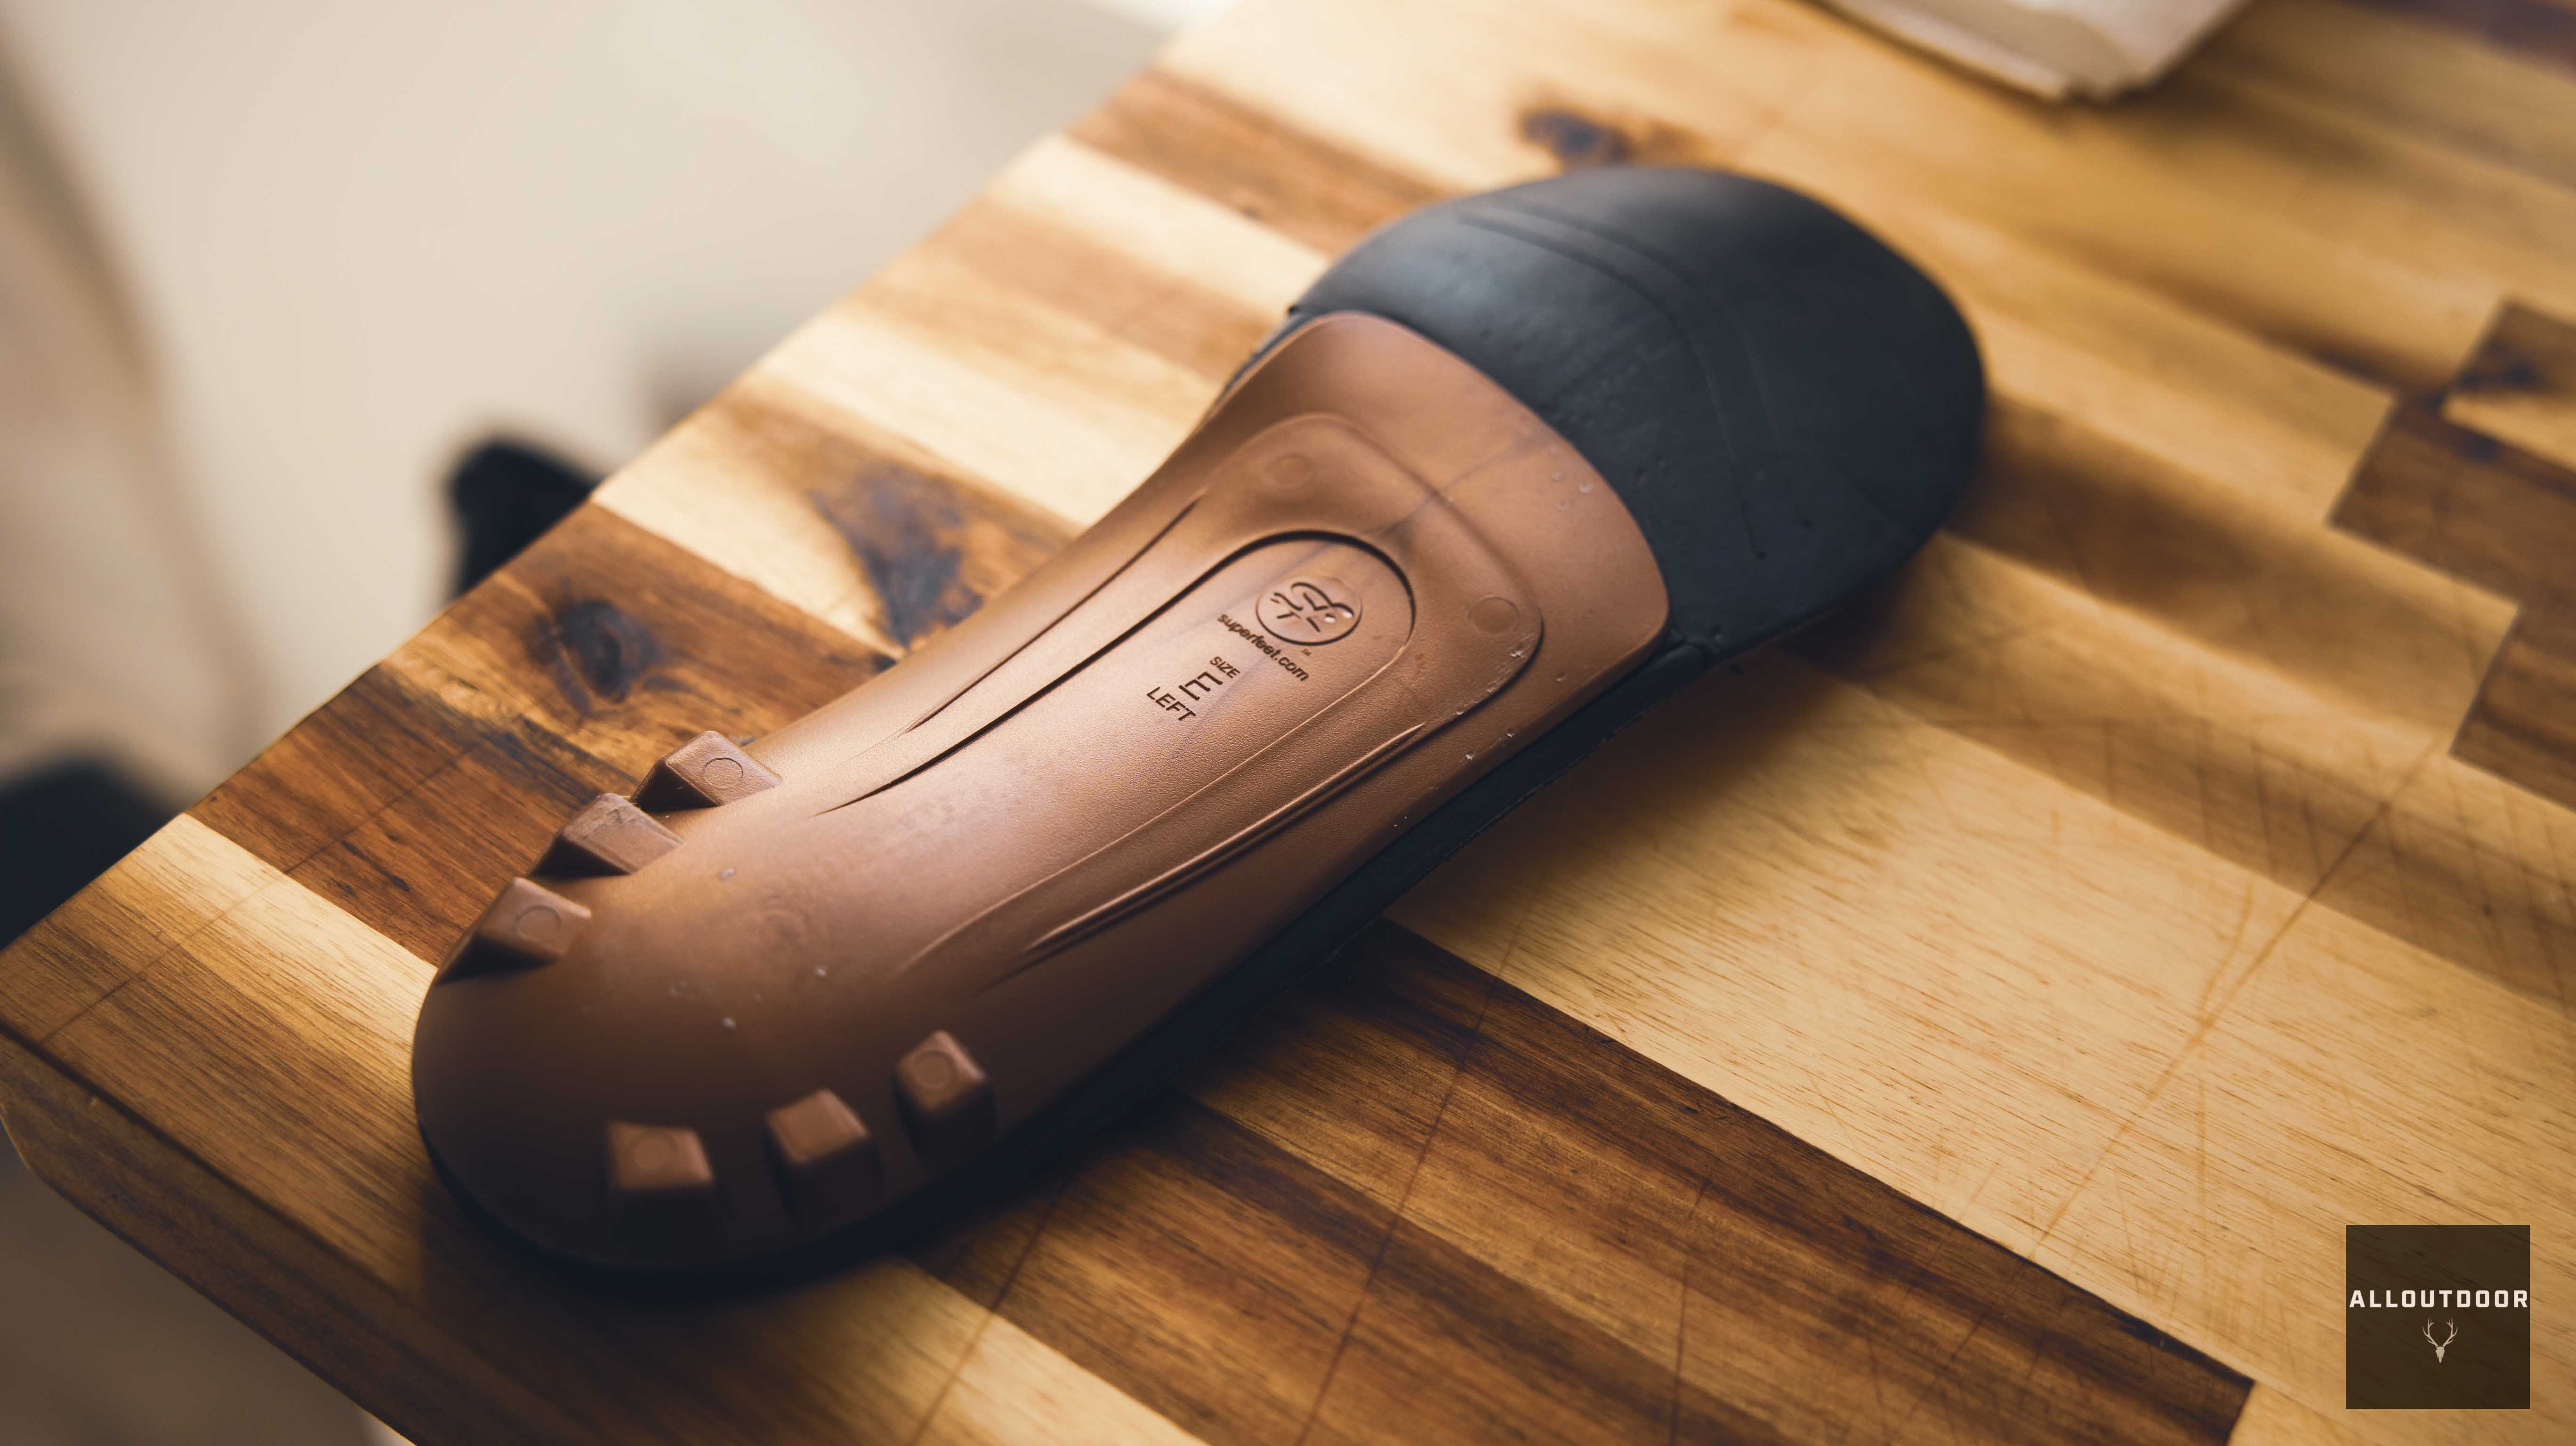 AllOutdoor Review - Superfeet All Purpose Memory Foam Insoles